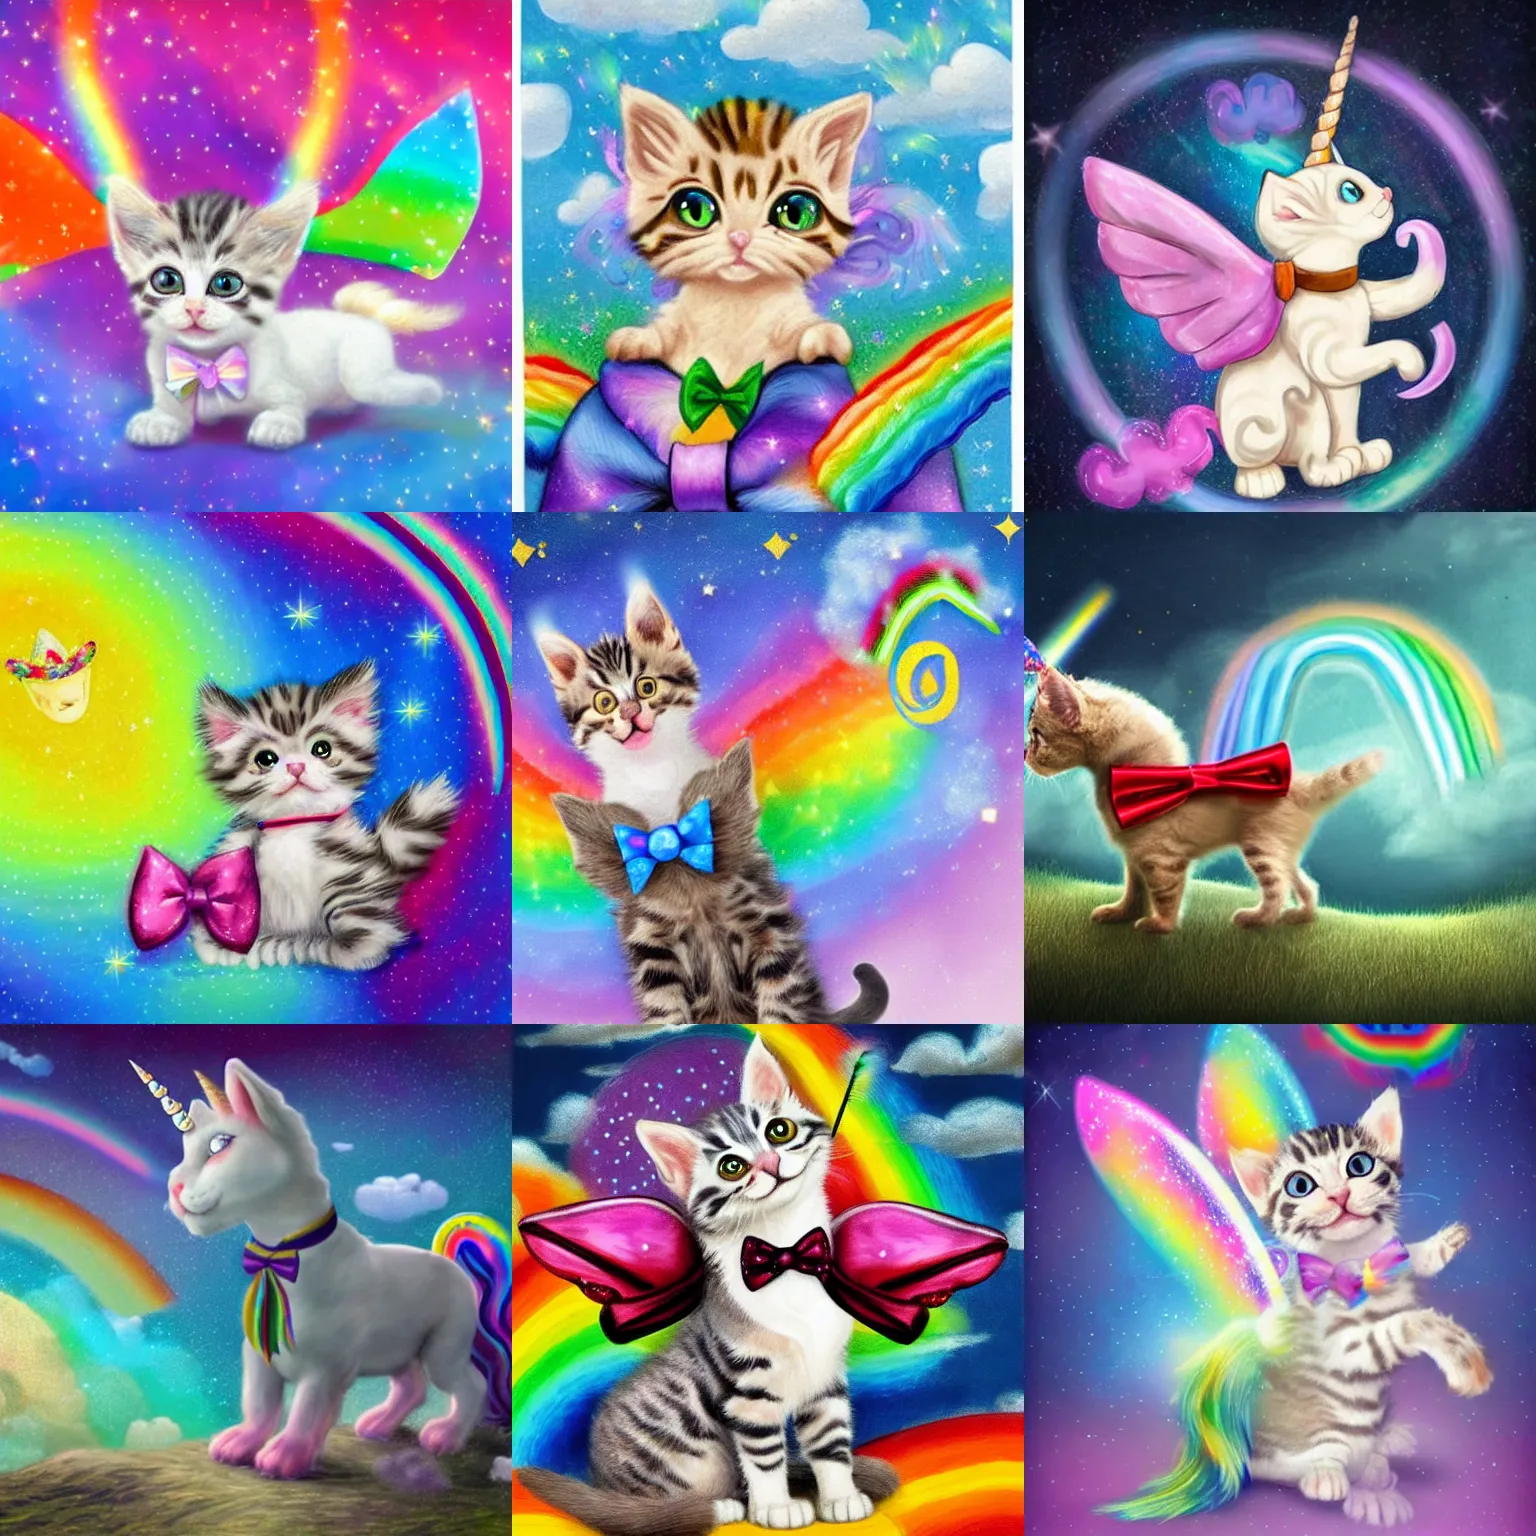 Prompt: a fuzzy kitten with a bow tie riding a unicorn that has translucent glitter wings and who is farting out a rainbow across the sky, fantasy art